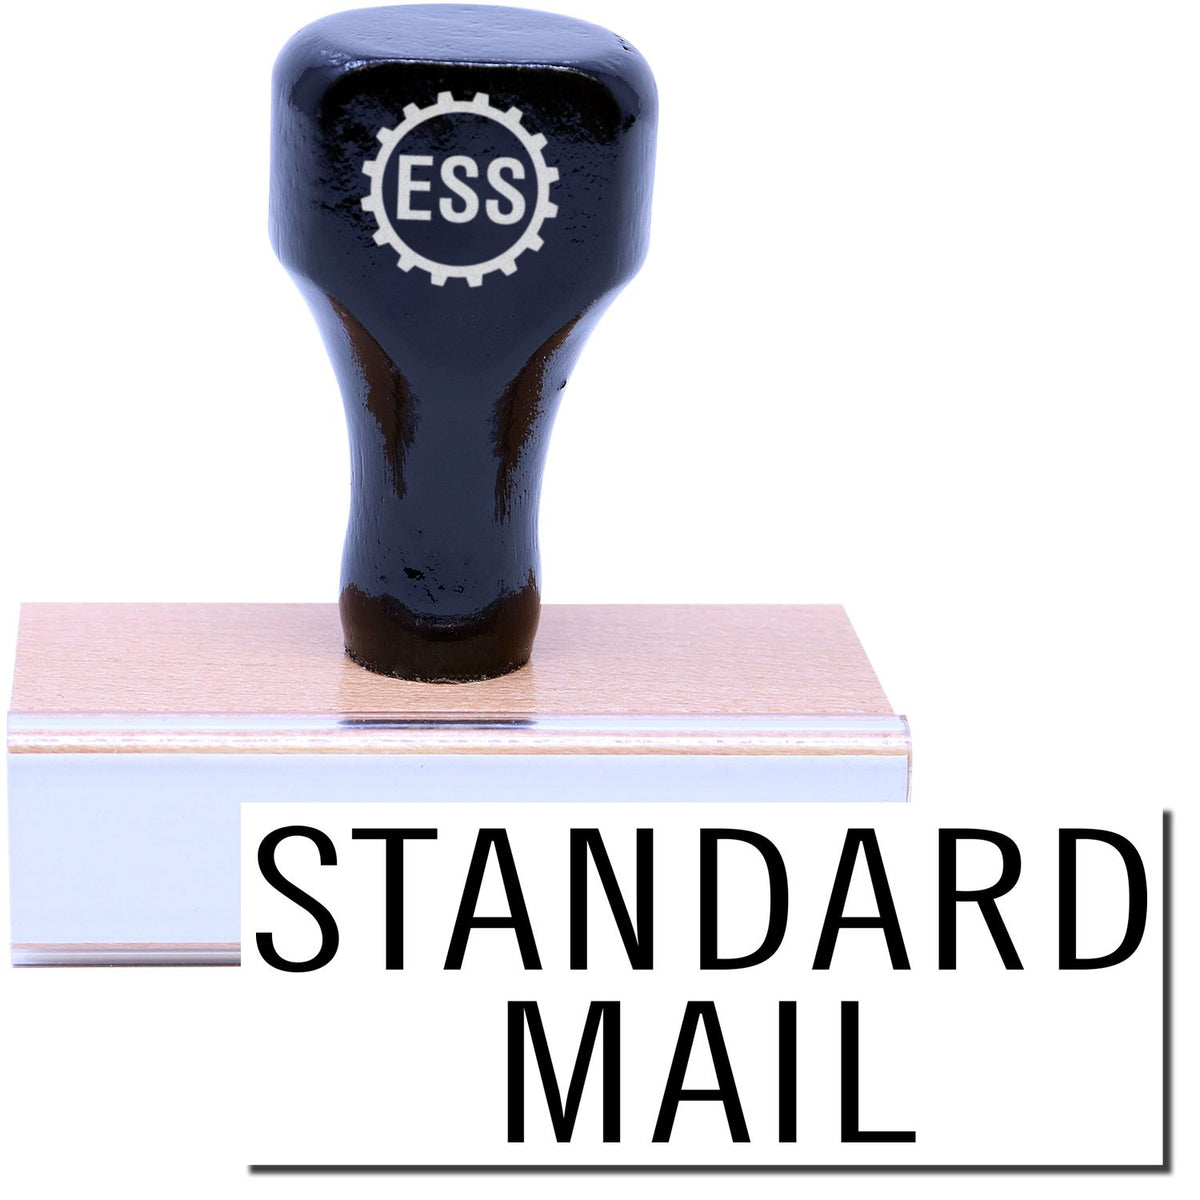 A stock office rubber stamp with a stamped image showing how the text &quot;STANDARD MAIL&quot; in a large font and in a stacked style is displayed after stamping.